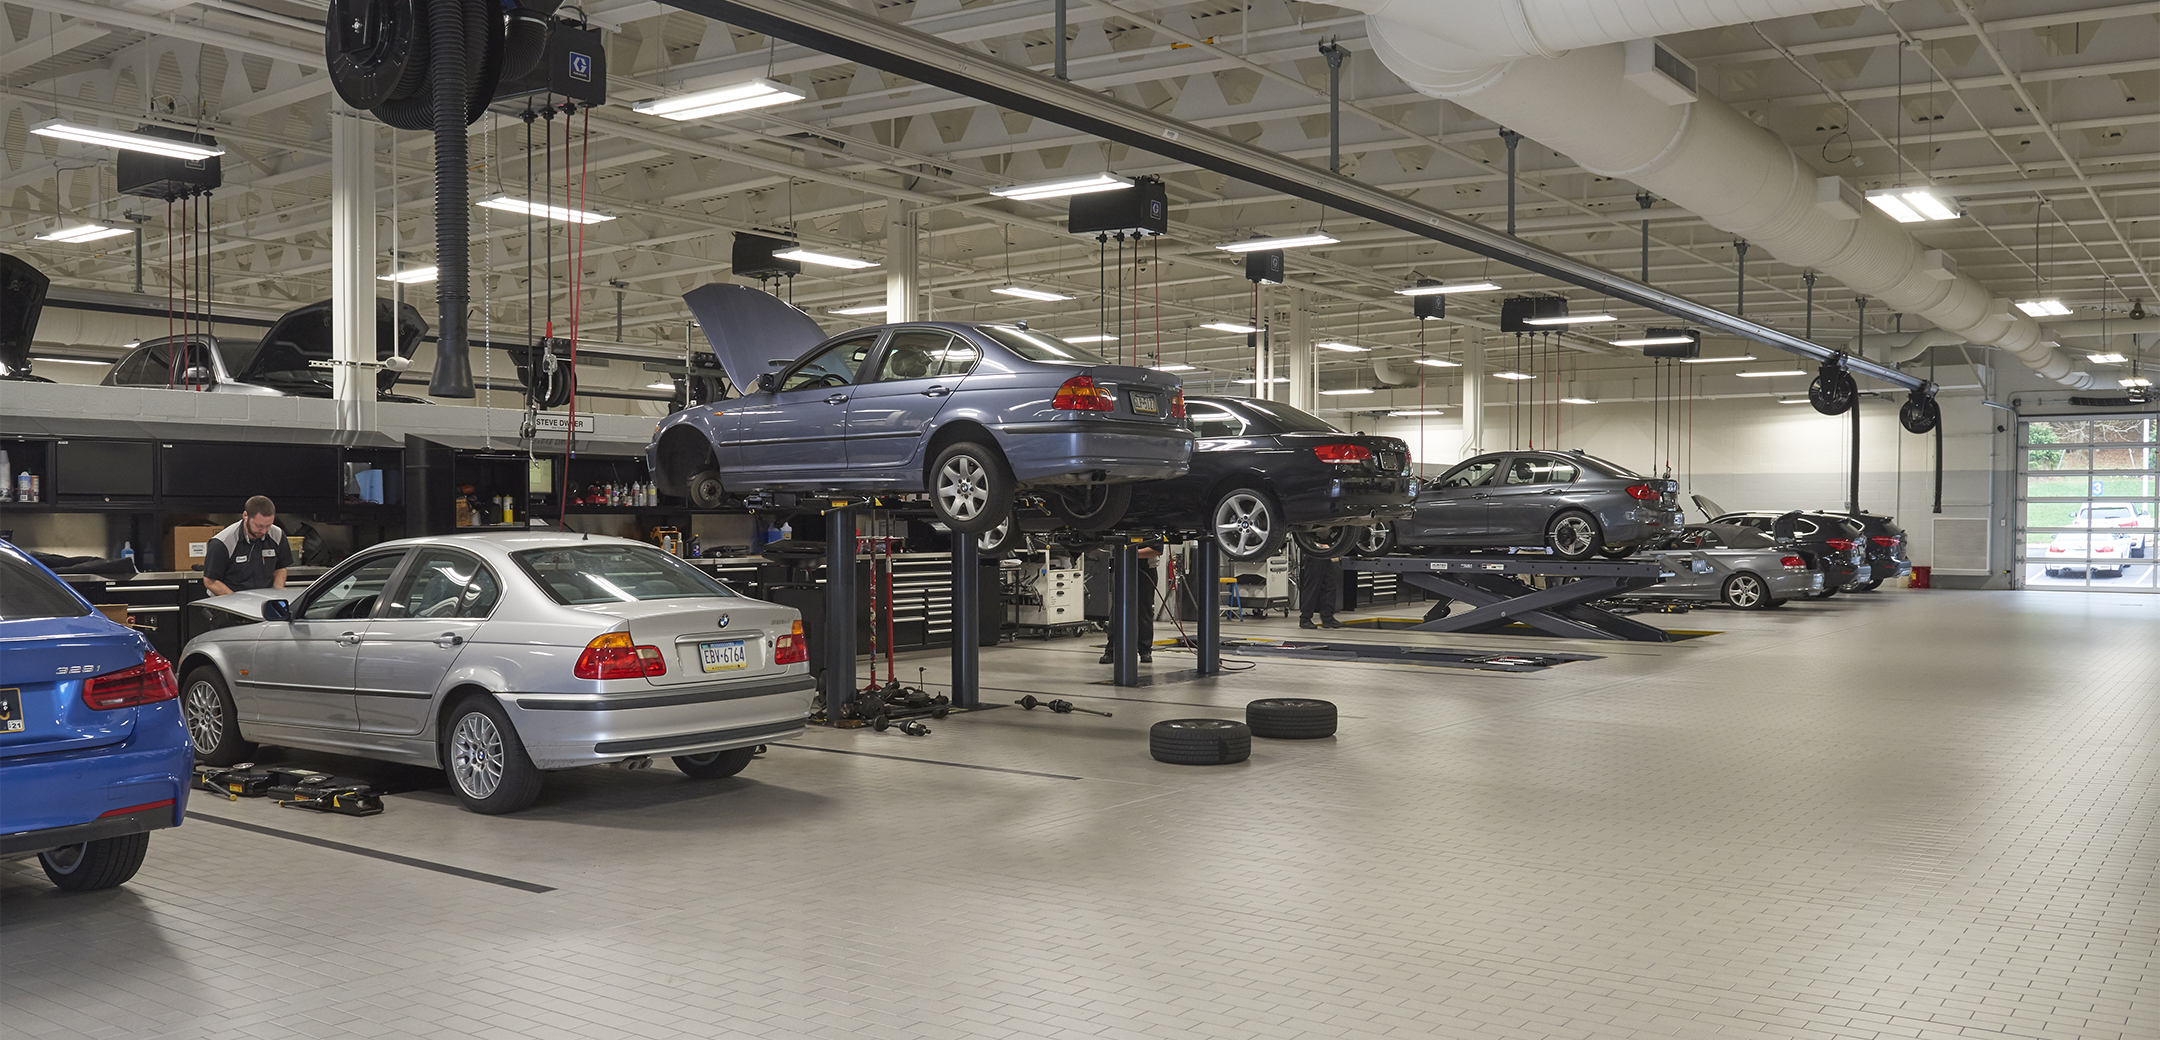 An interior view of the Ottos BMW building with brick tile flooring, tall ceiling, adjustable vacuum on rails, car jacks and a mechanic working on the car.